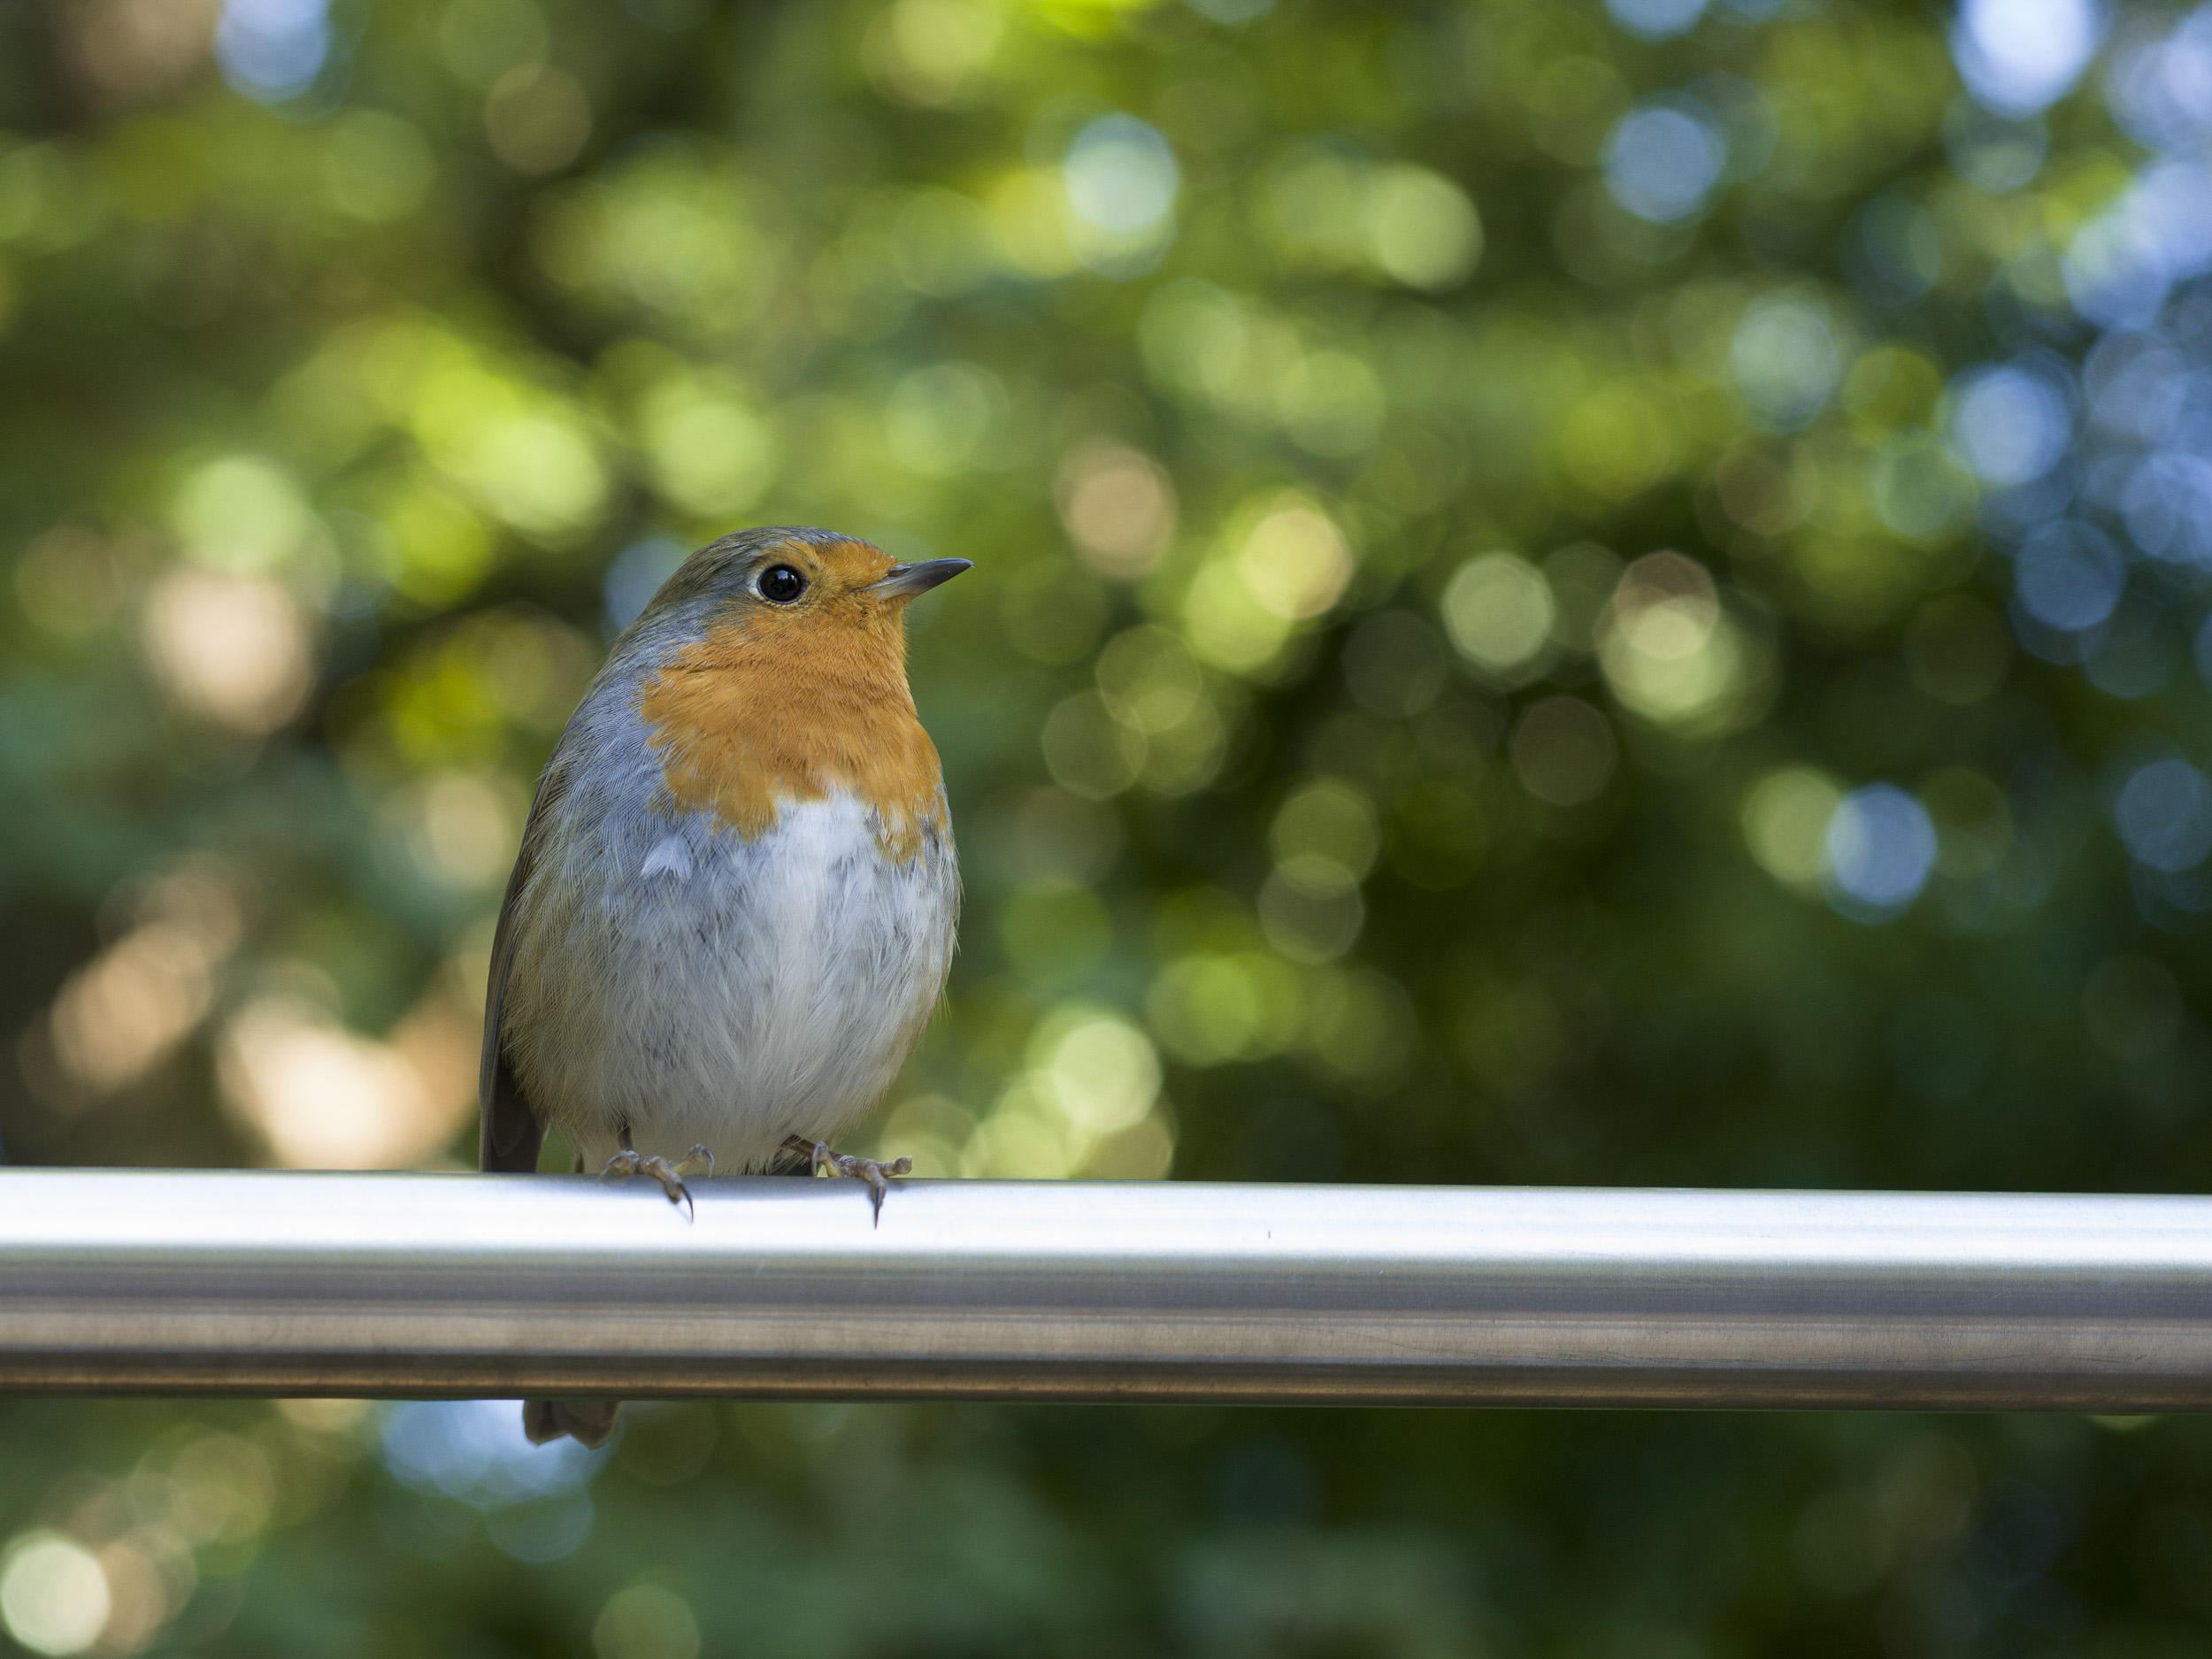 Sample image taken with the Hasselblad X2D 100C of a robin this time cropped in closely